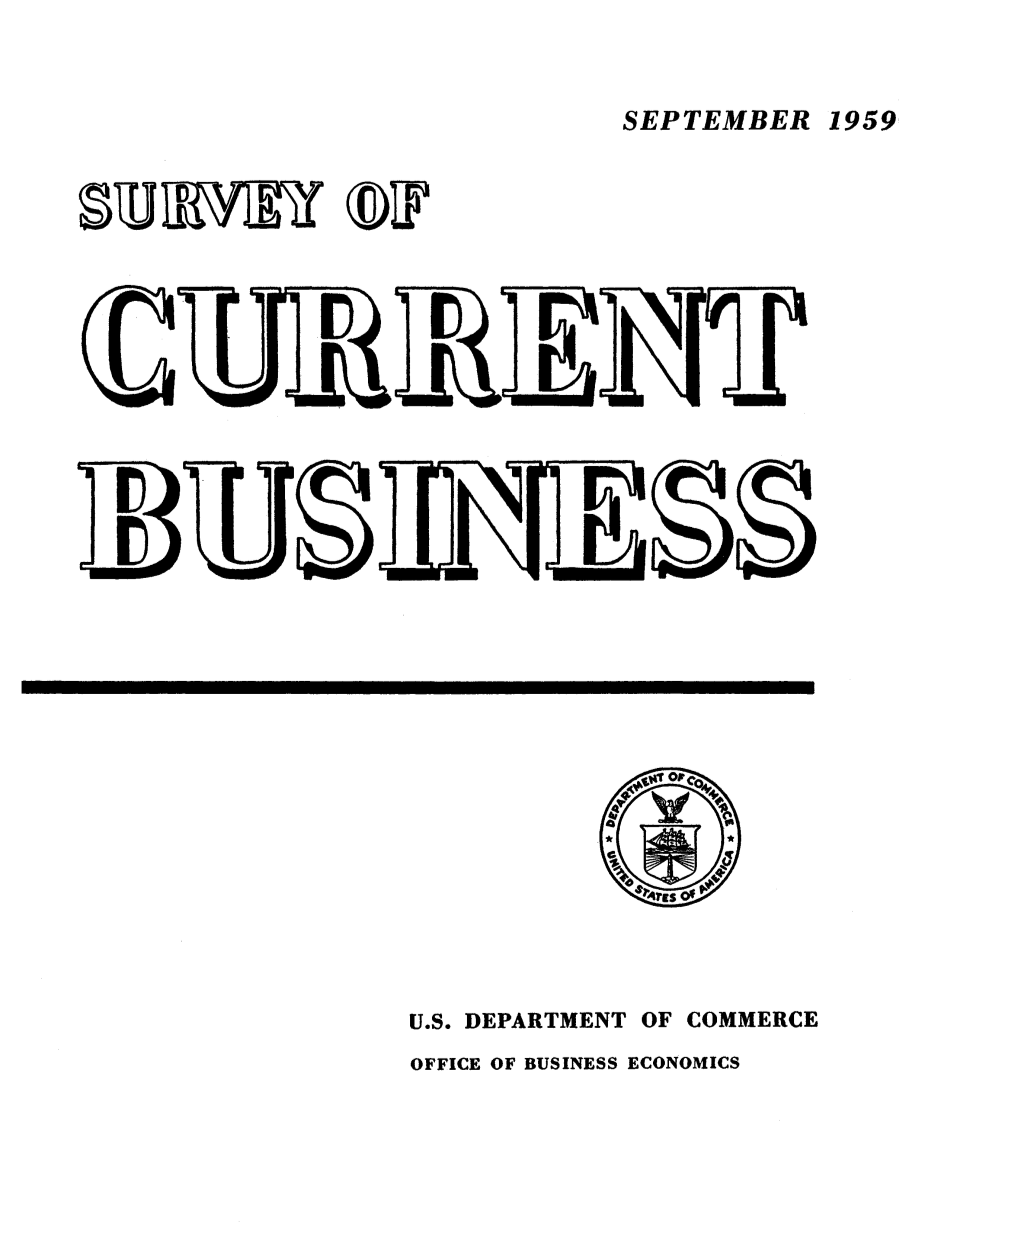 SURVEY of CURRENT BUSINESS September 1959 Justed Basis, with Gains in Industrial and Office Buildings and and Mining Production, and Freight Transportation